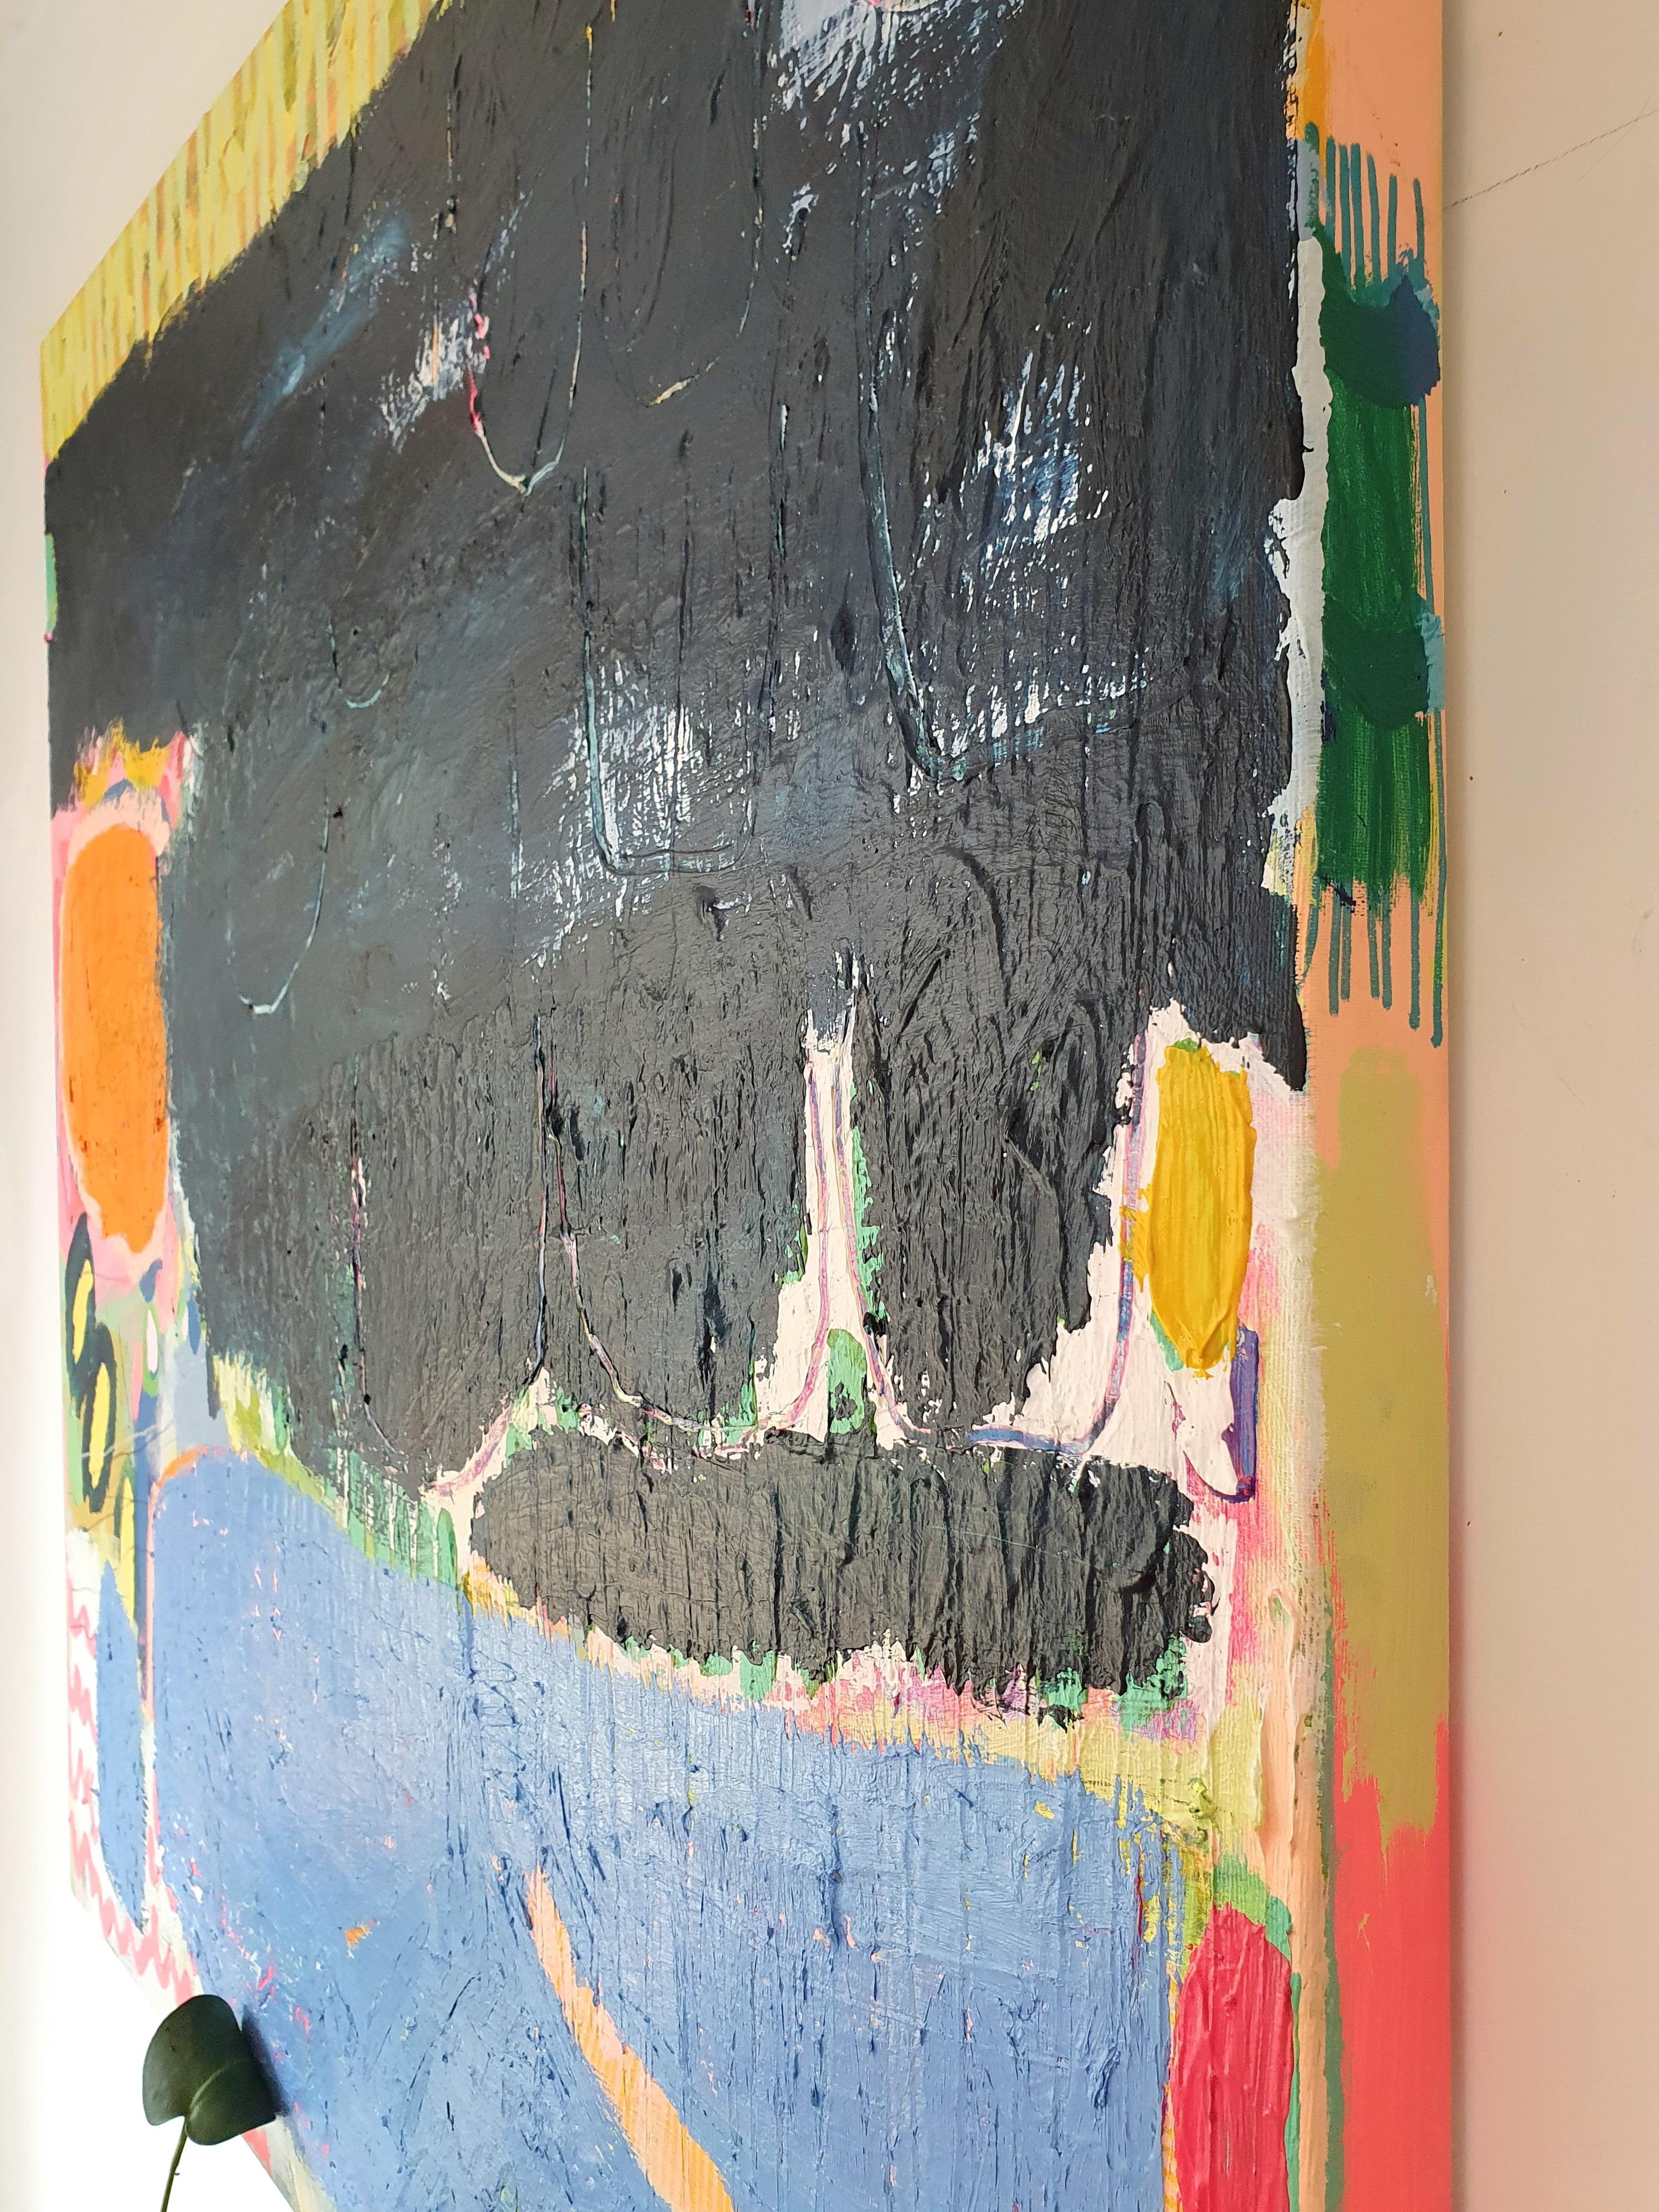 Jessie’s instinctive way of working explores the language of paint and mark making to evoke emotions in the viewer, aiming to communicate how pure abstract work can generate visual energetic joy and pleasure.

The way Jessie experiments with